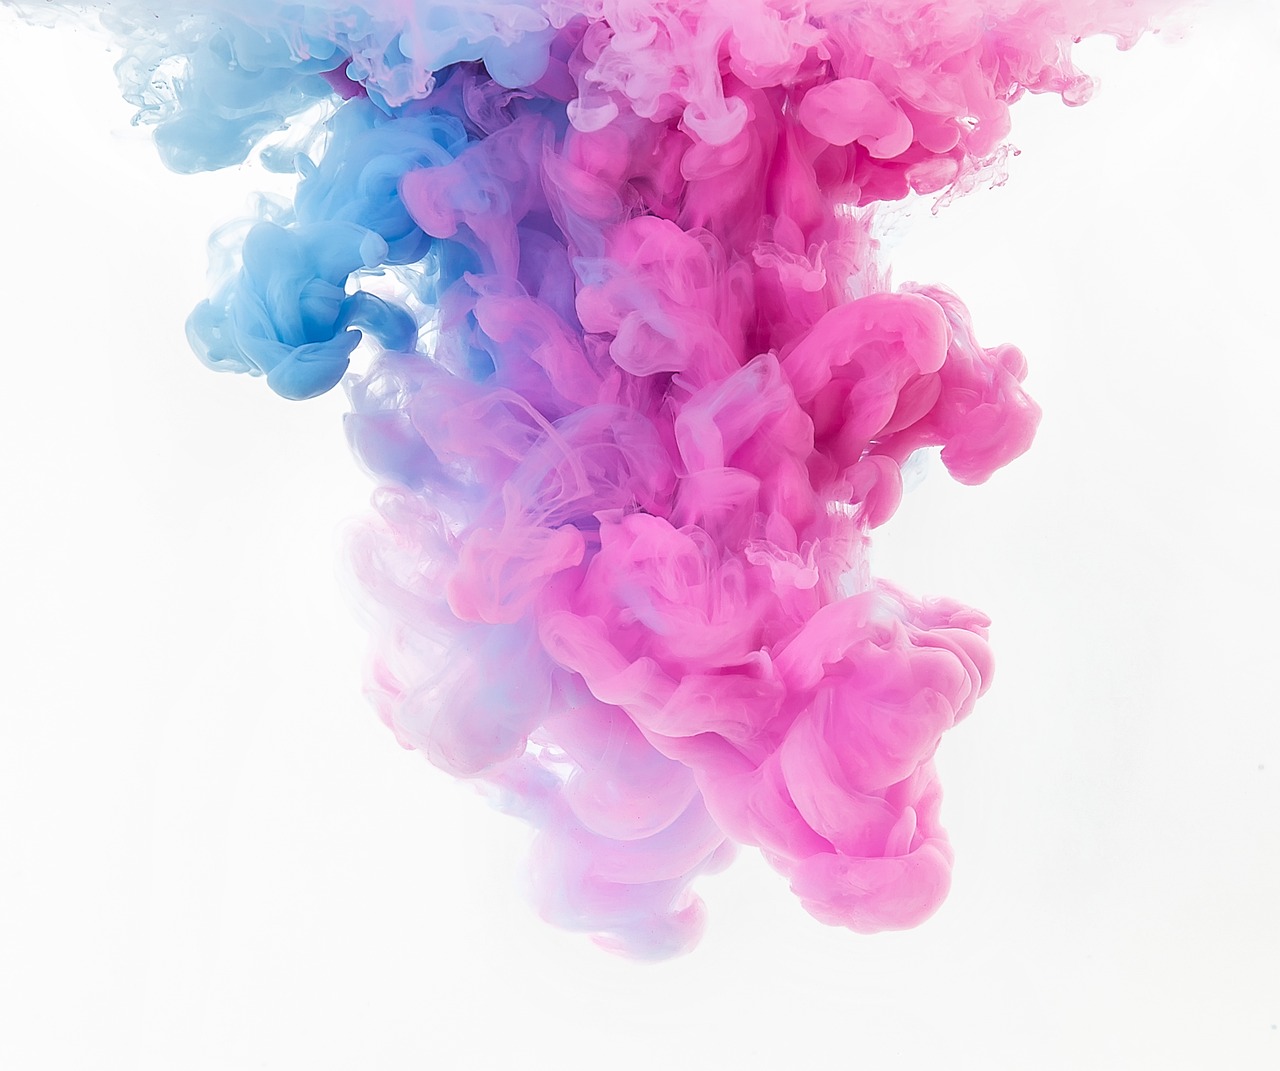 a close up of a pink and blue substance, inspired by Kim Keever, pexels, on a white background, istock, background image, floating in perfume